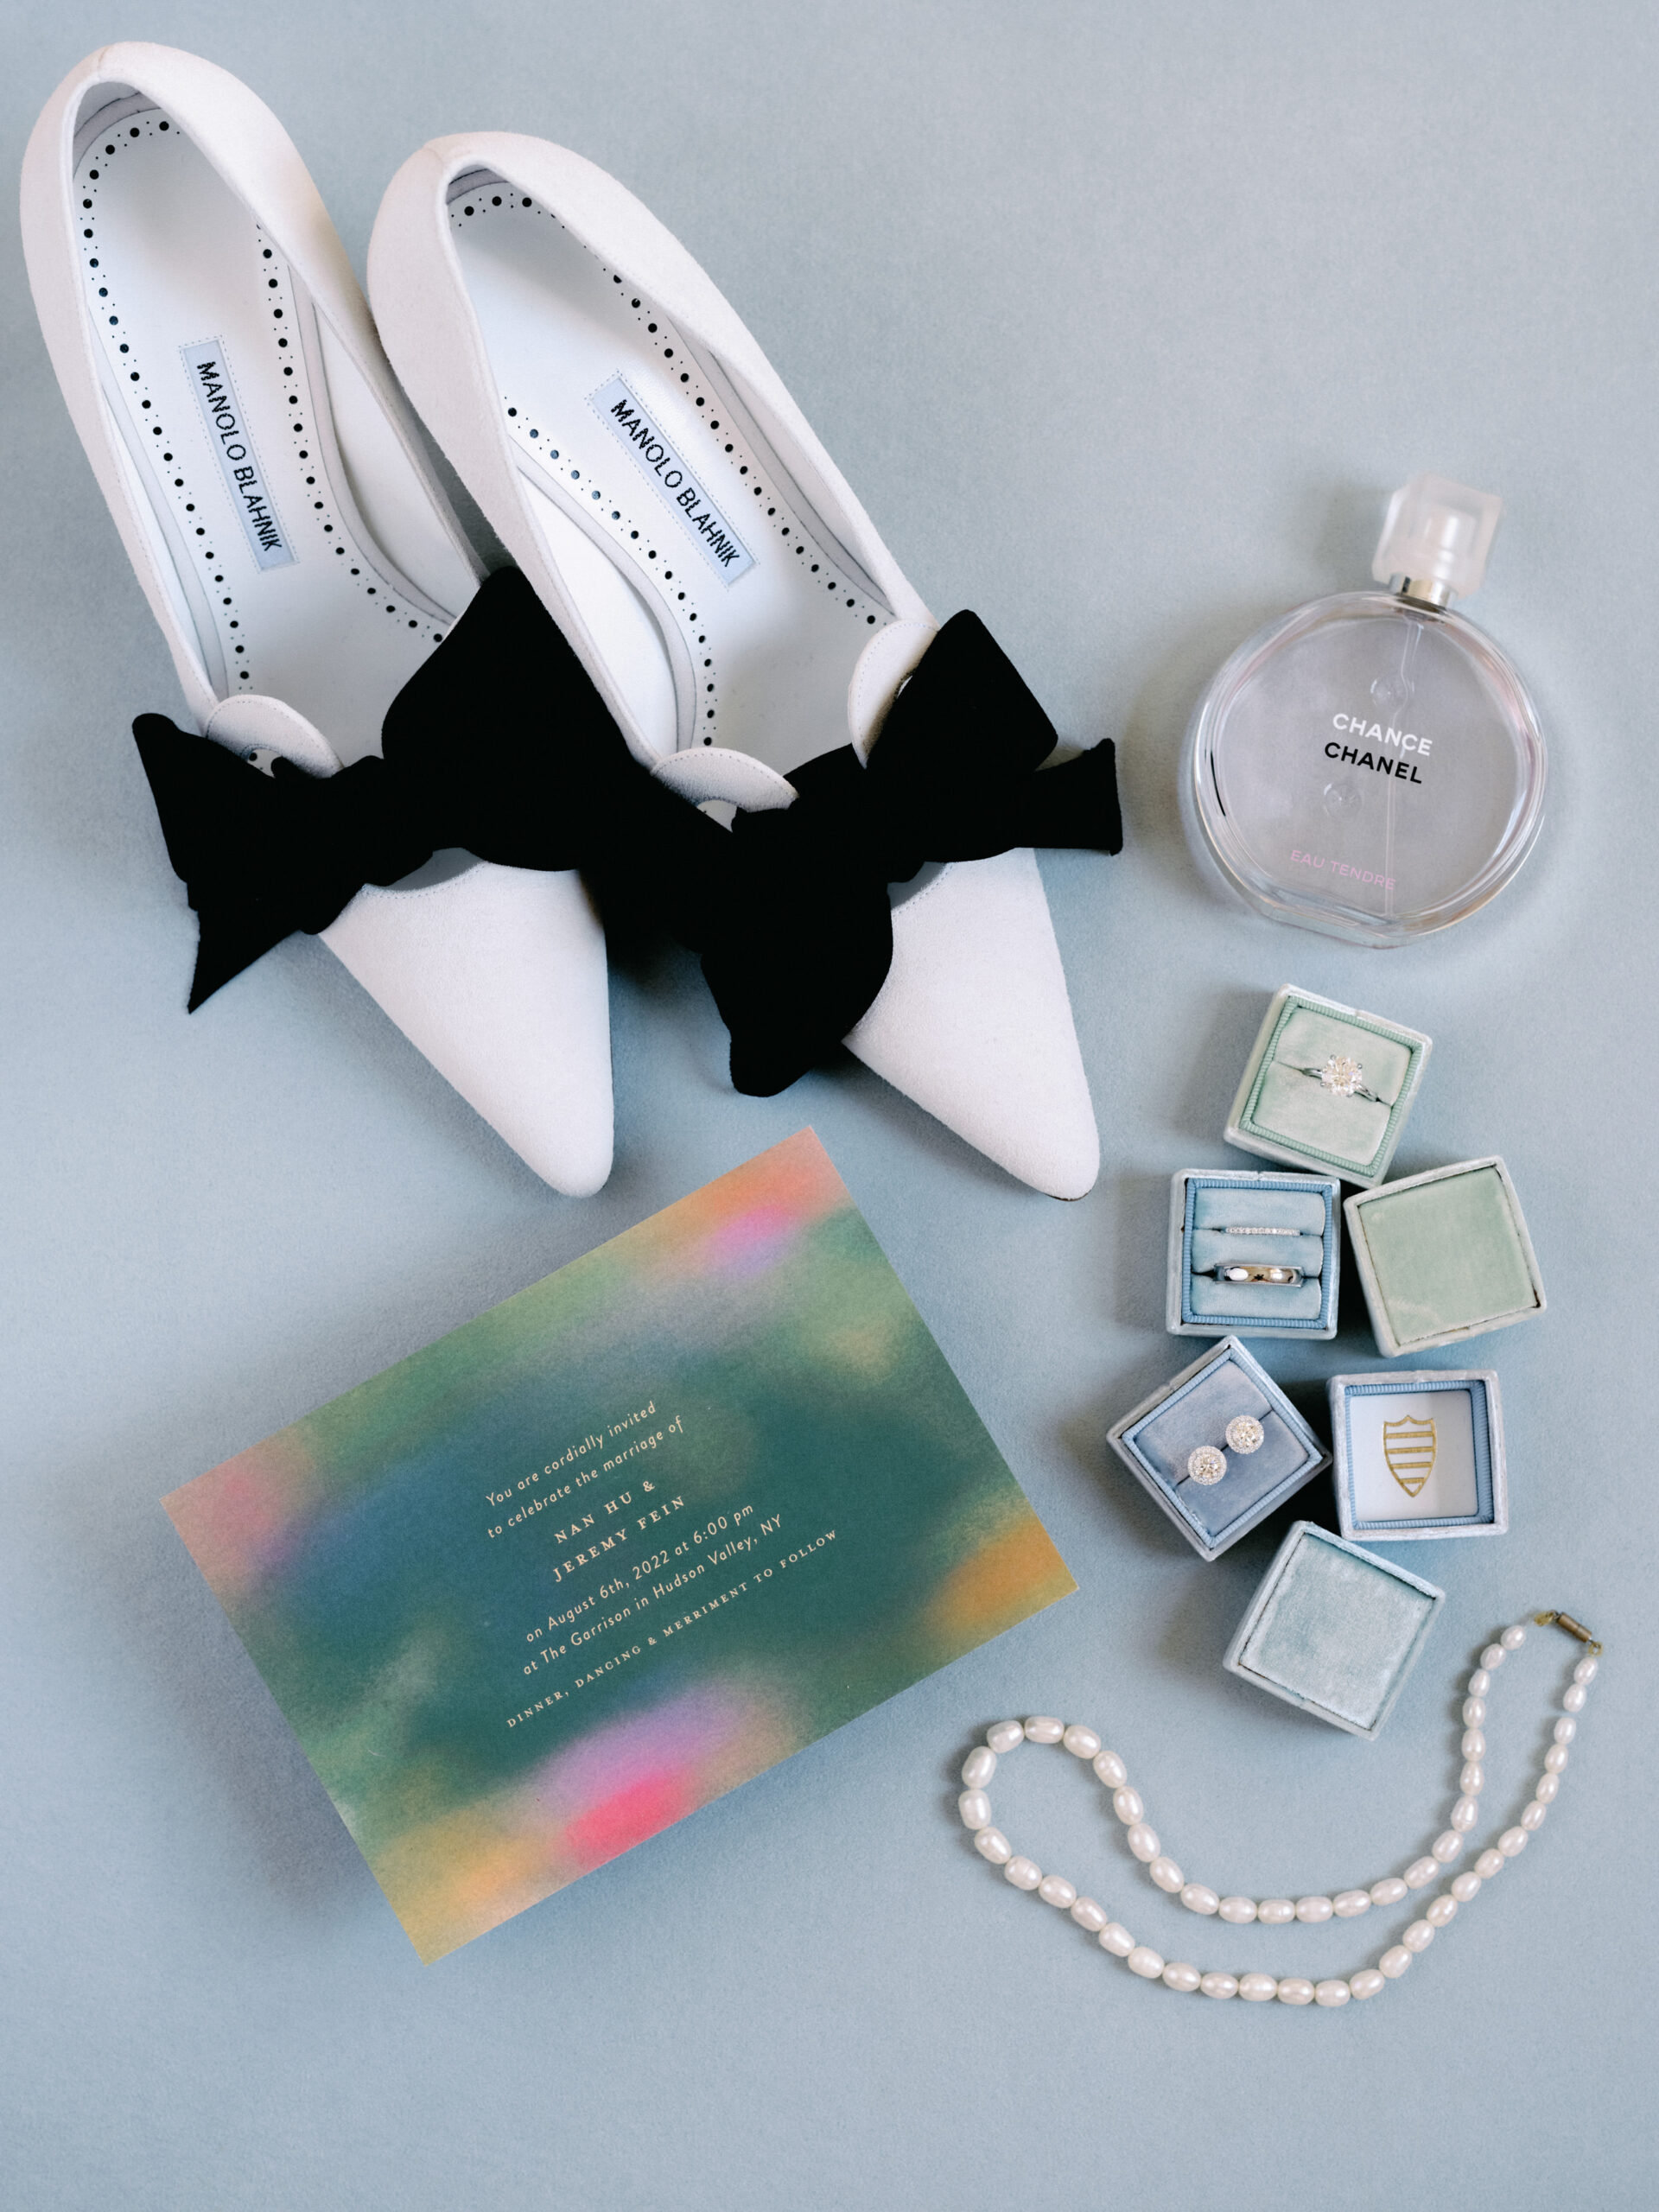 Photo of the bride's shoes, jewelry, and invitation. Fine art wedding photography image by Jenny Fu Studio